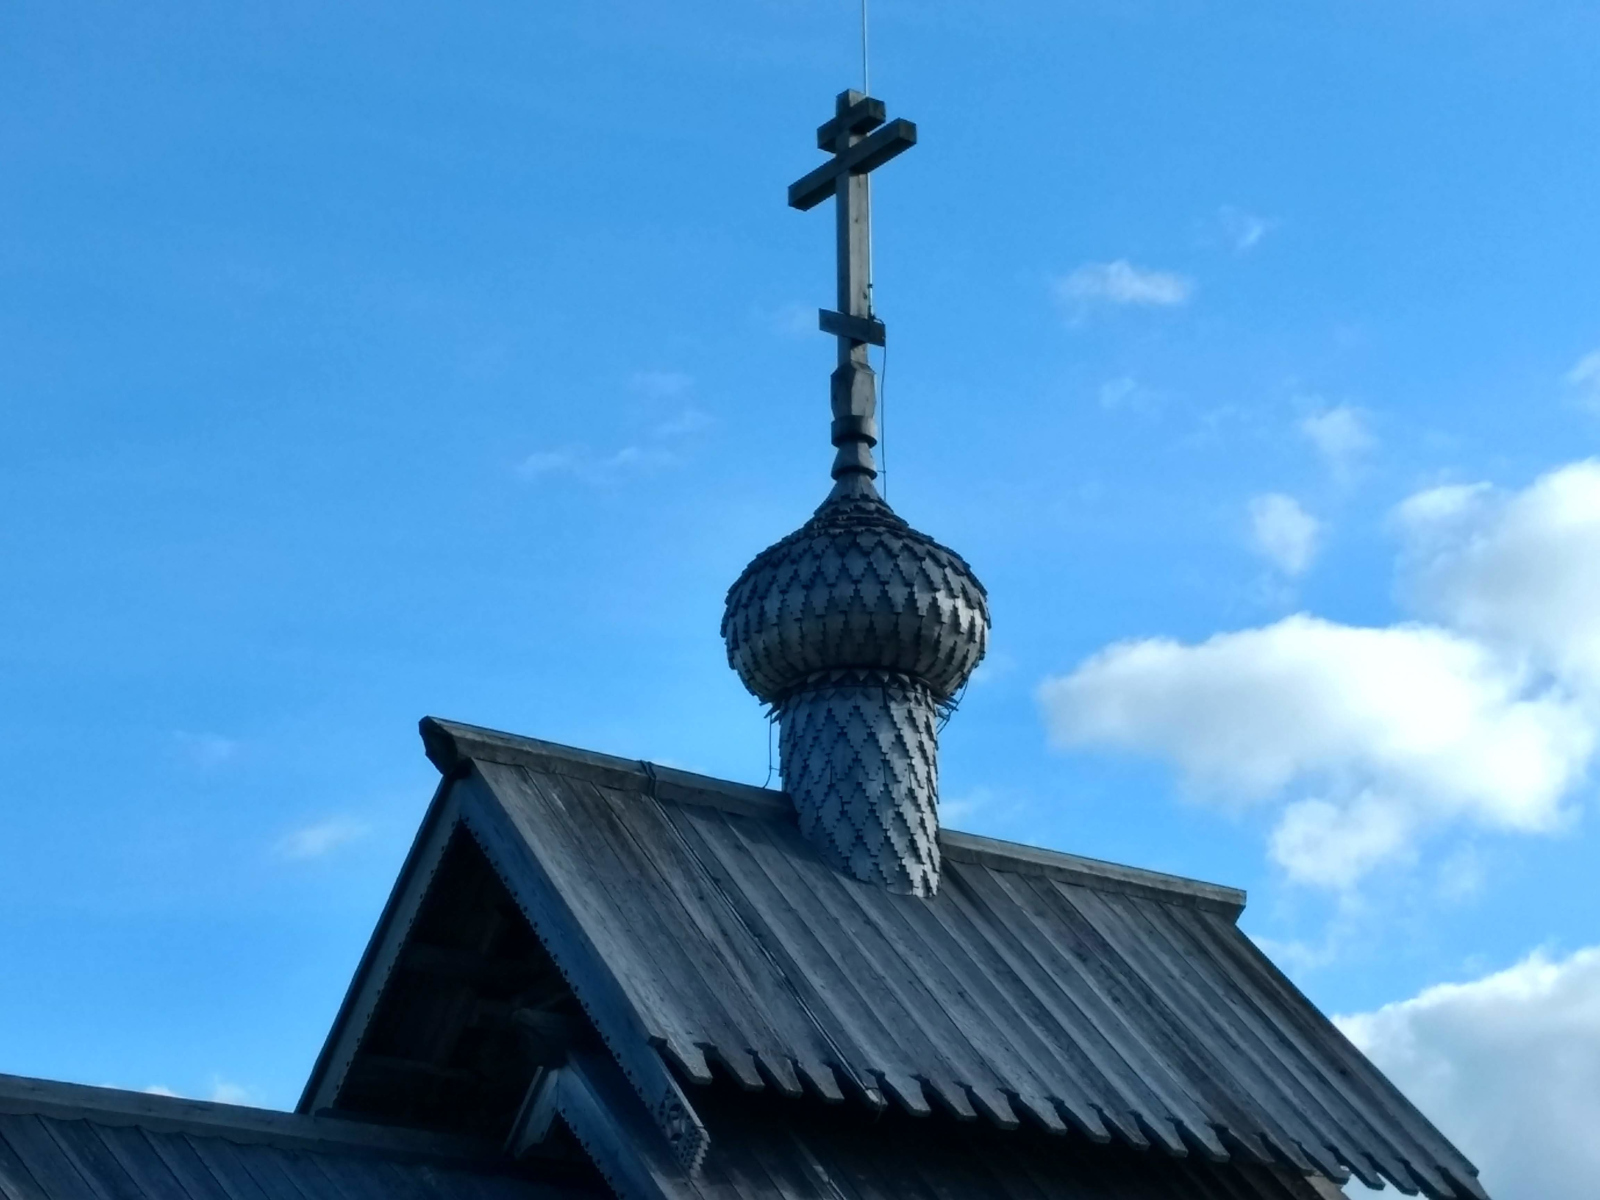 photo - detail of dome on a small church